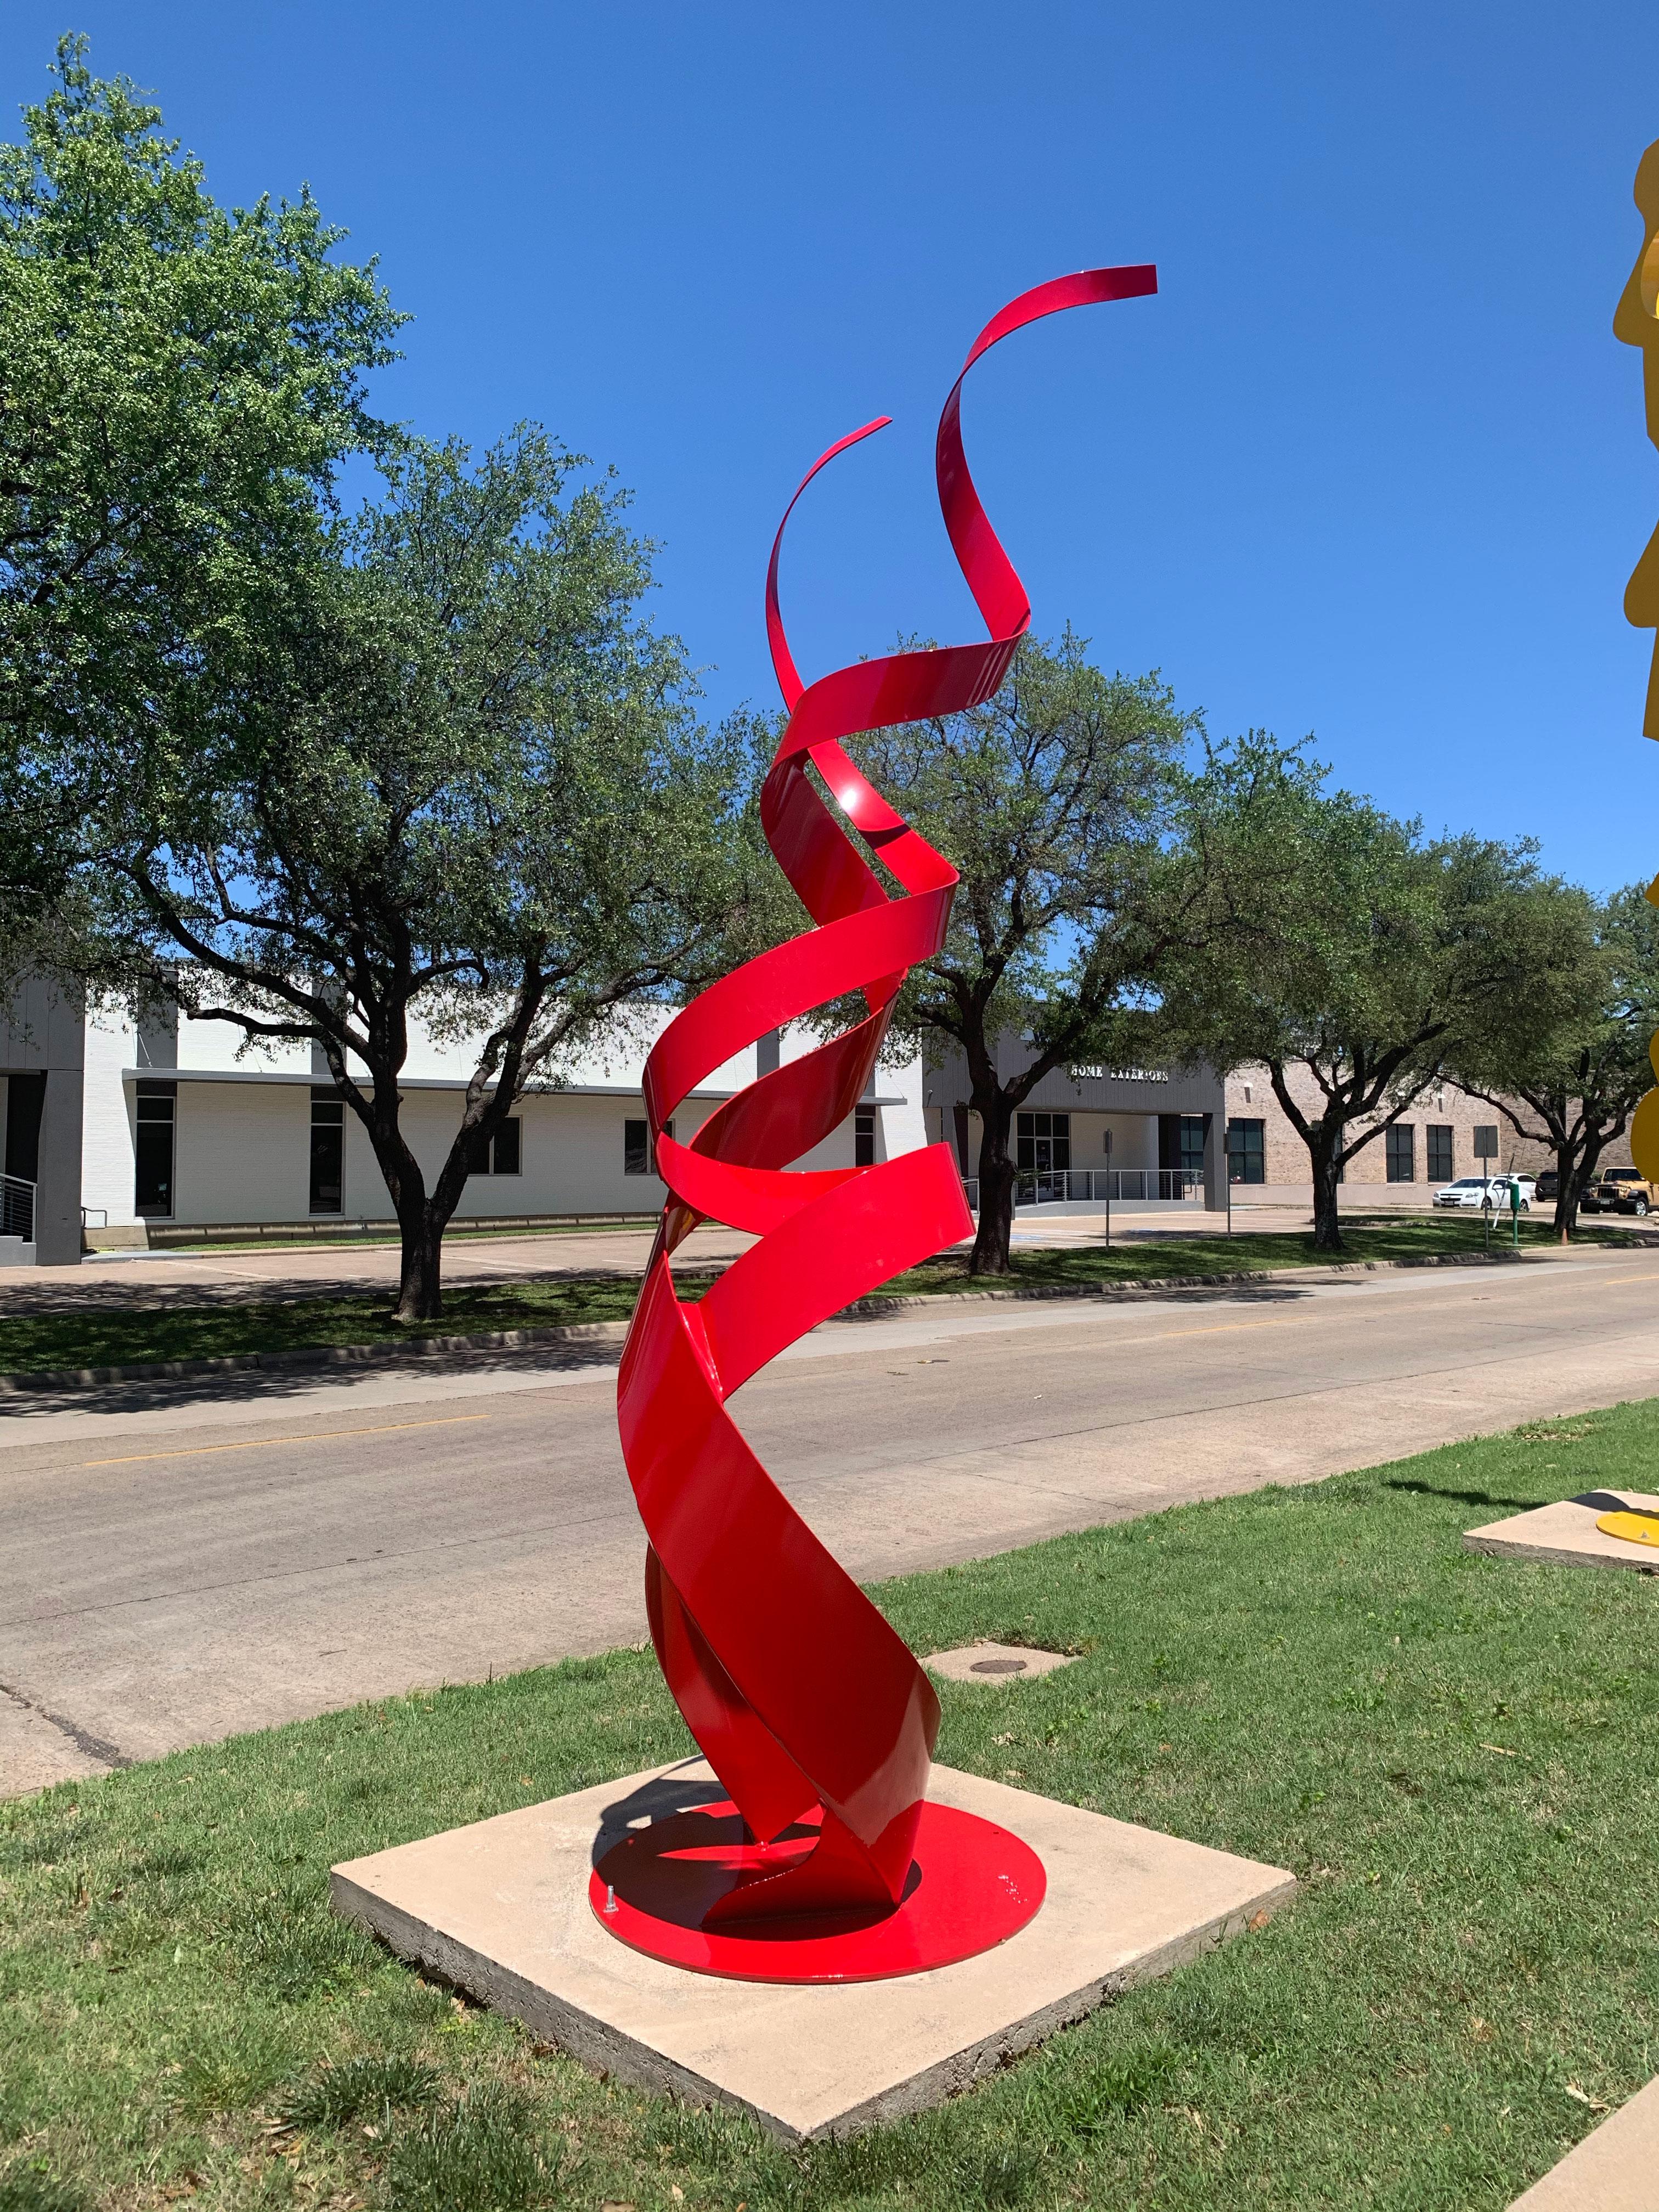 Nic Noblique is a Texas based sculptor whose preferred medium is steel. Noblique has, in a relatively short amount of time, become one of the foremost abstract sculptors in the United States.

